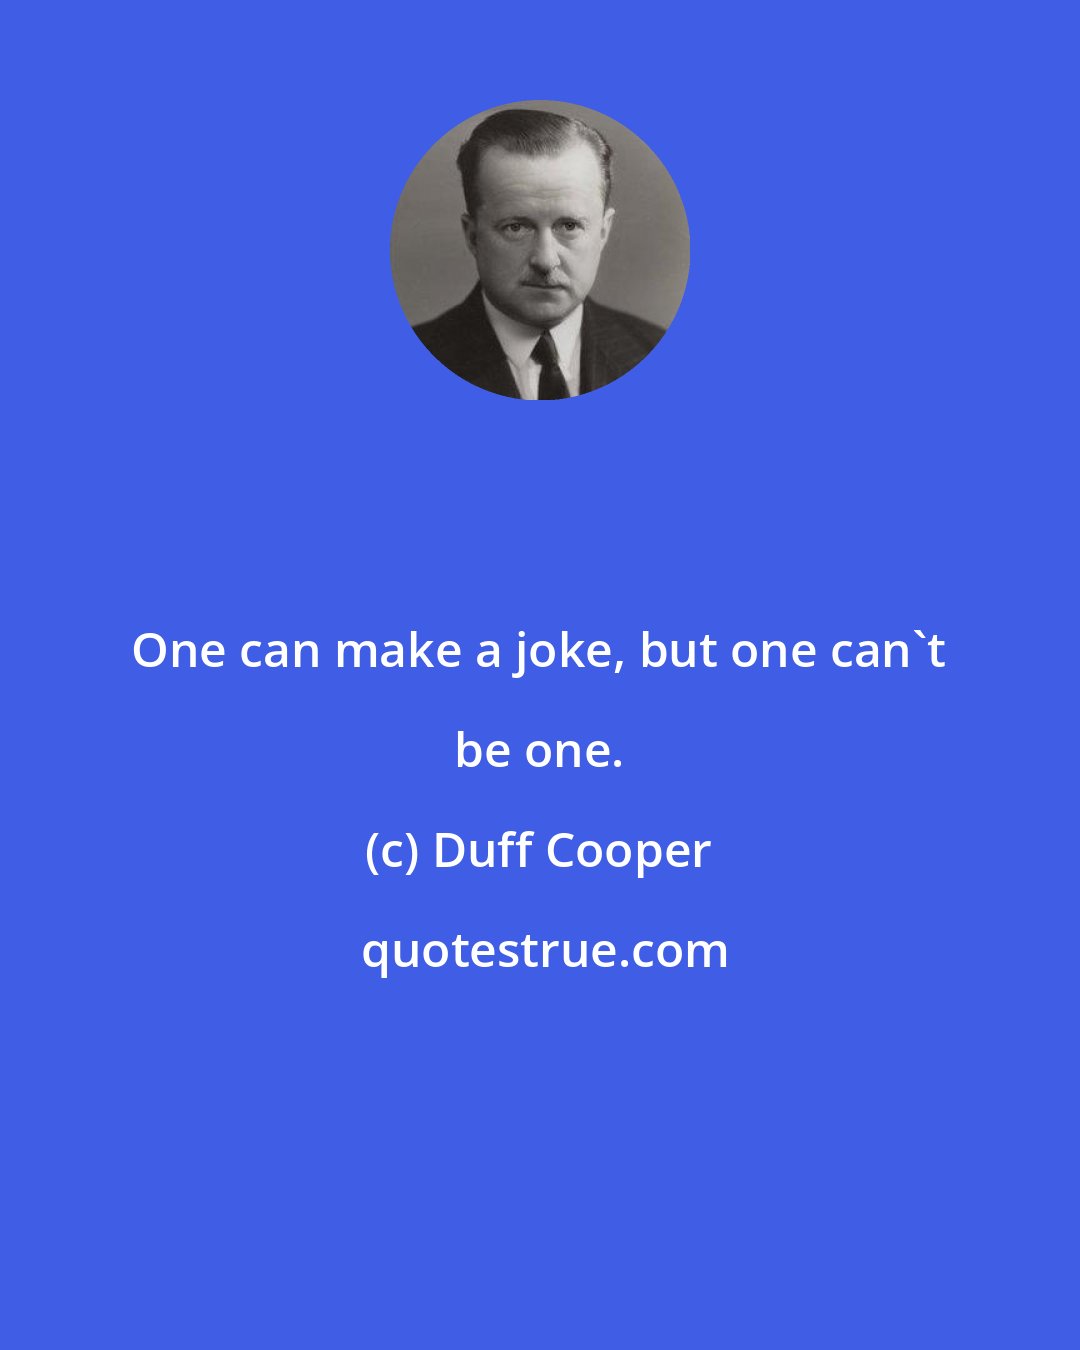 Duff Cooper: One can make a joke, but one can't be one.